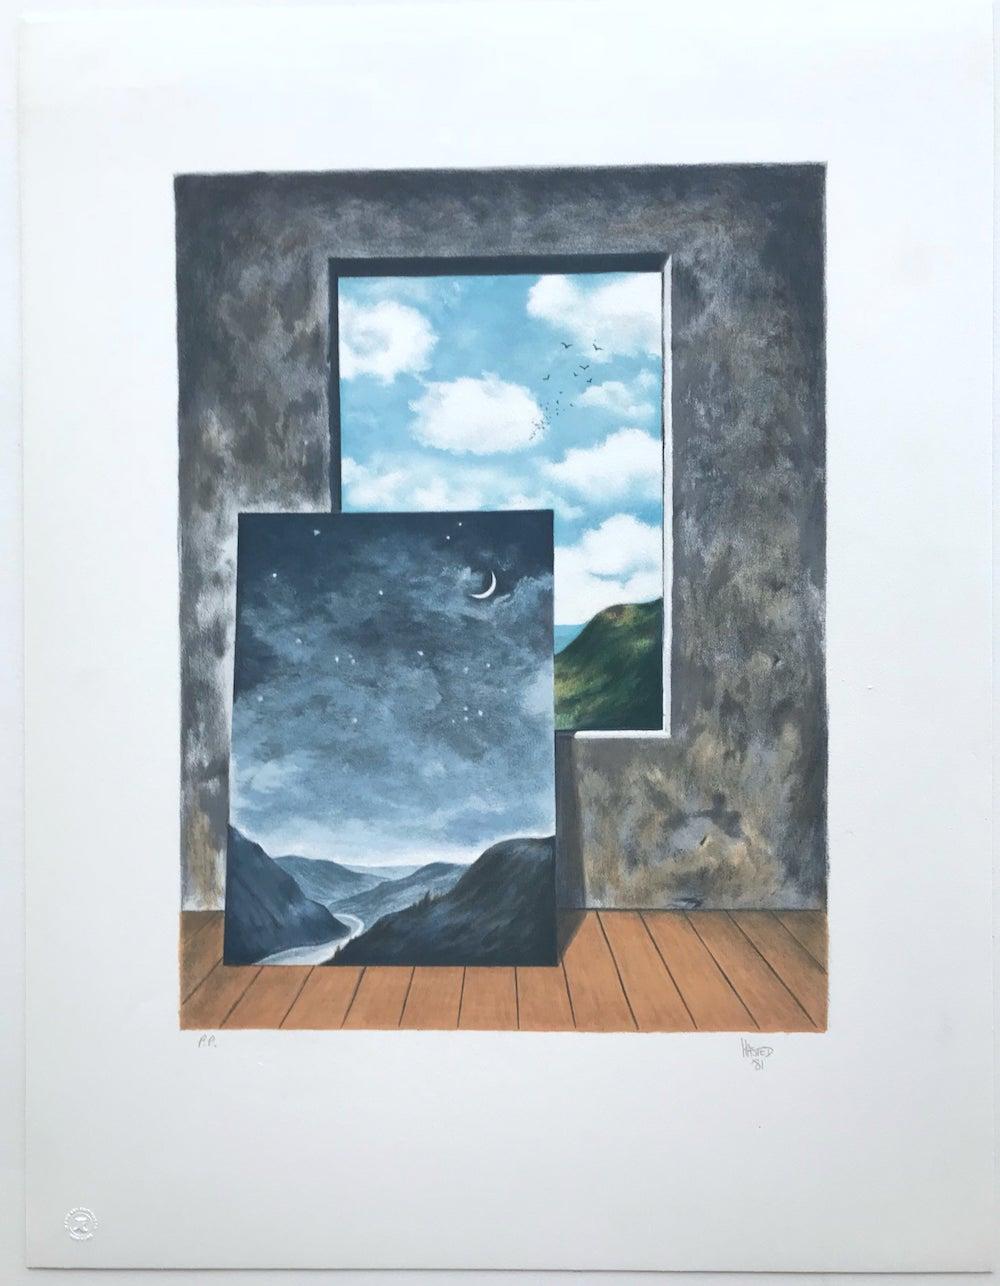 Random Selection 2 is an original hand drawn limited edition lithograph by the British artist, Michael Hasted printed using hand lithography on archival Somerset paper, 100% acid free.
Random Selection is a surrealist composition depicting a window